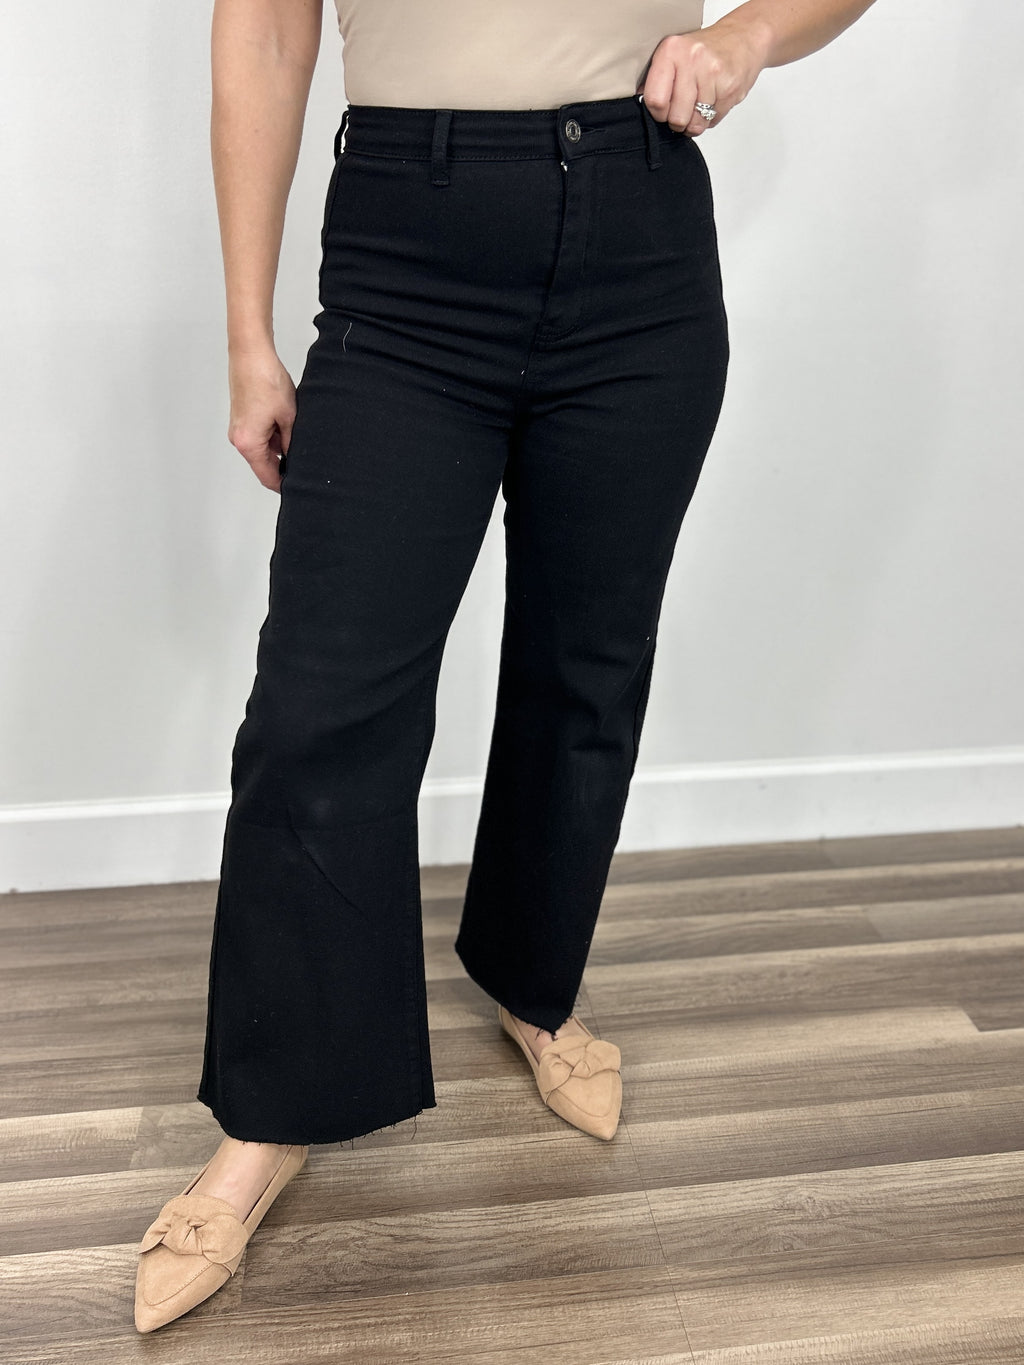 Murphy stretch wide leg pant in black front view.